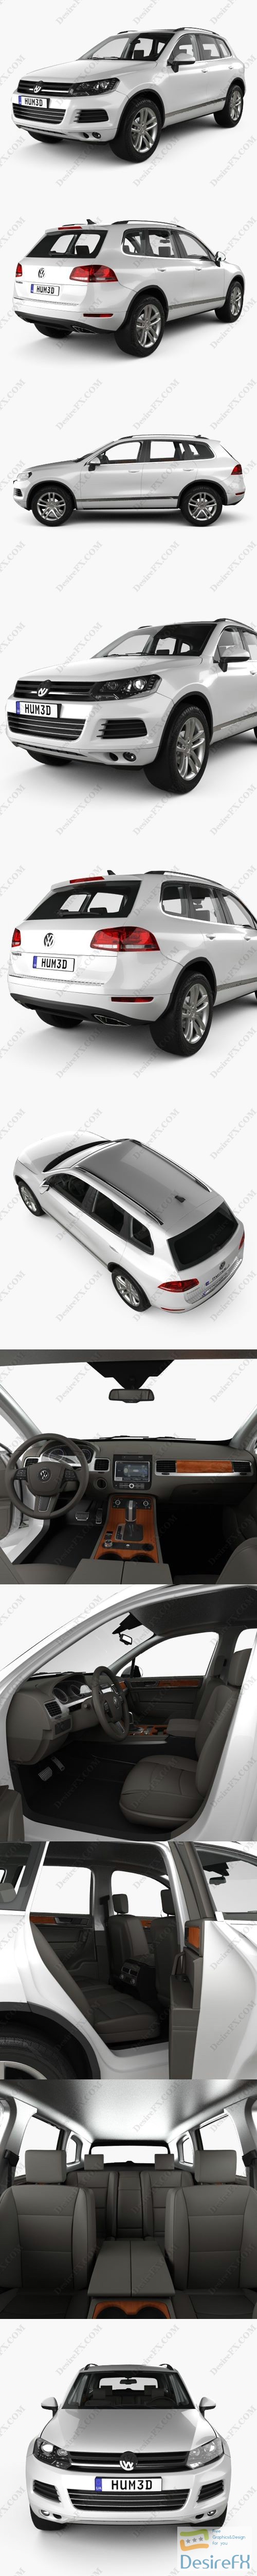 Volkswagen Touareg with HQ interior 2010 3D Model